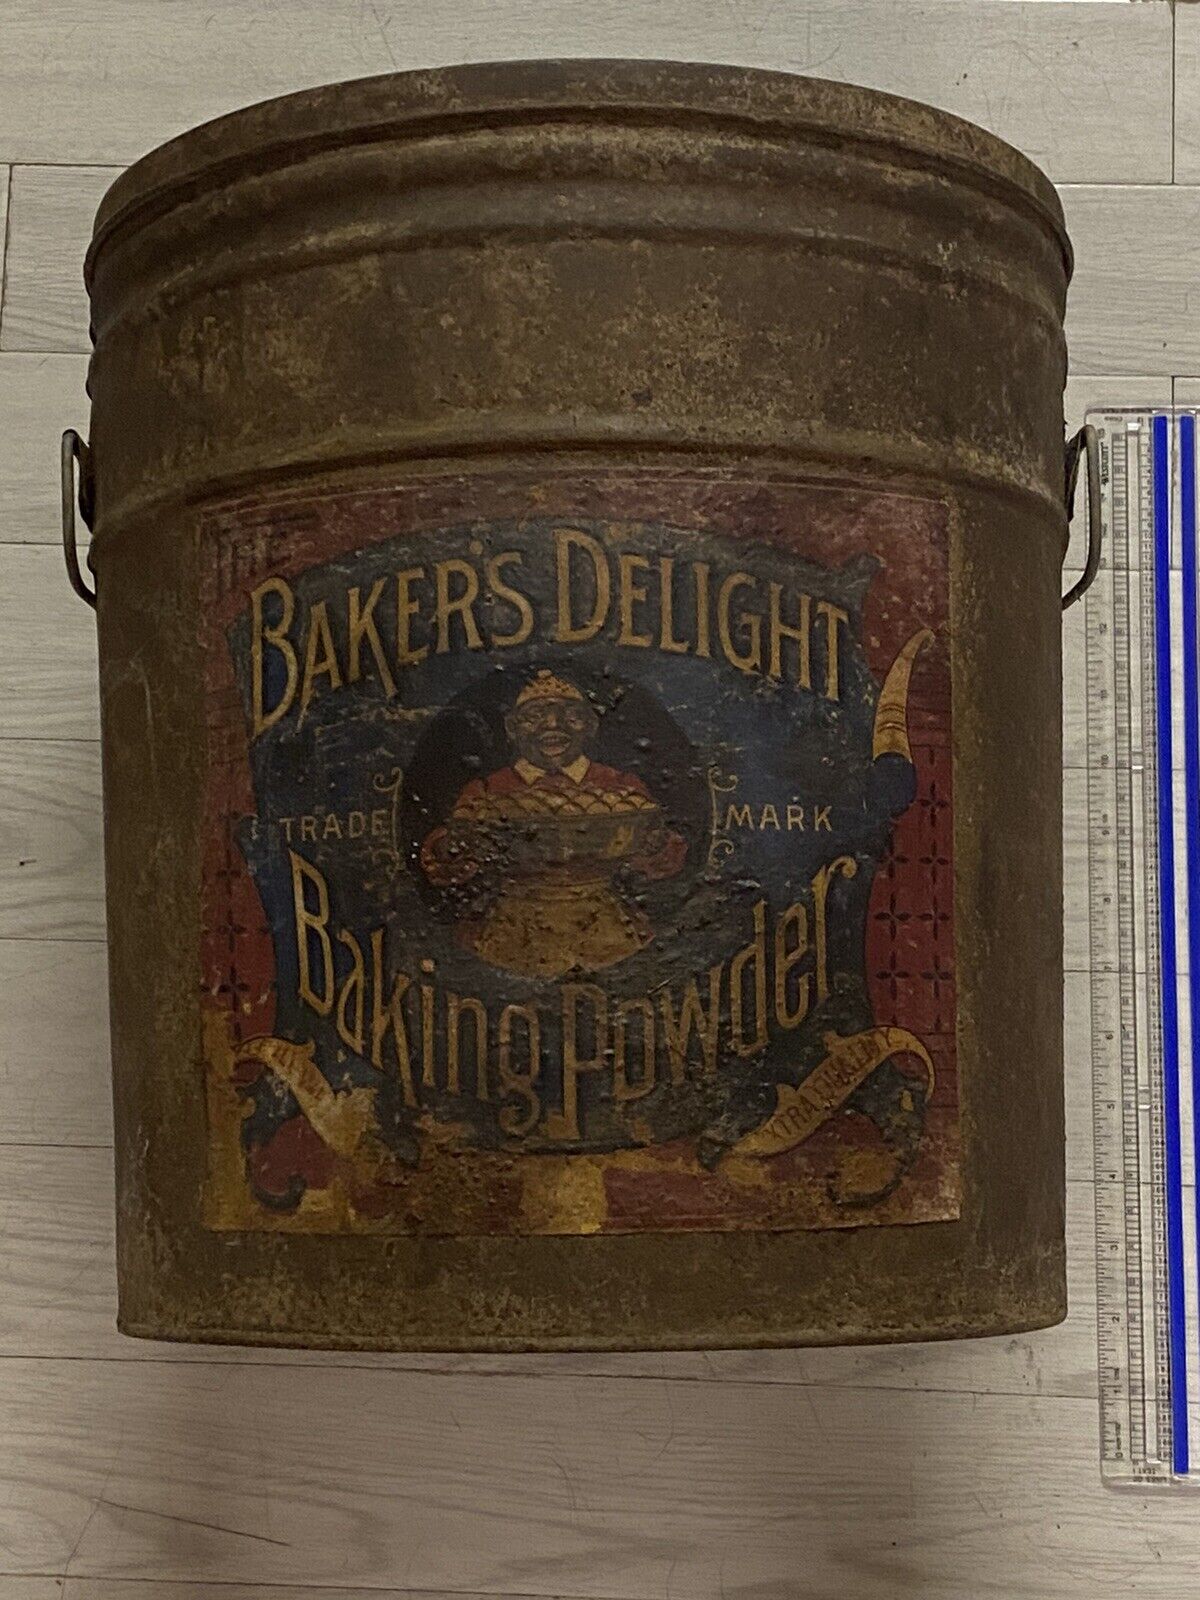 Bakers Delight Baking Powder Tin Litho Can 12x14” Rare African American Ad Large